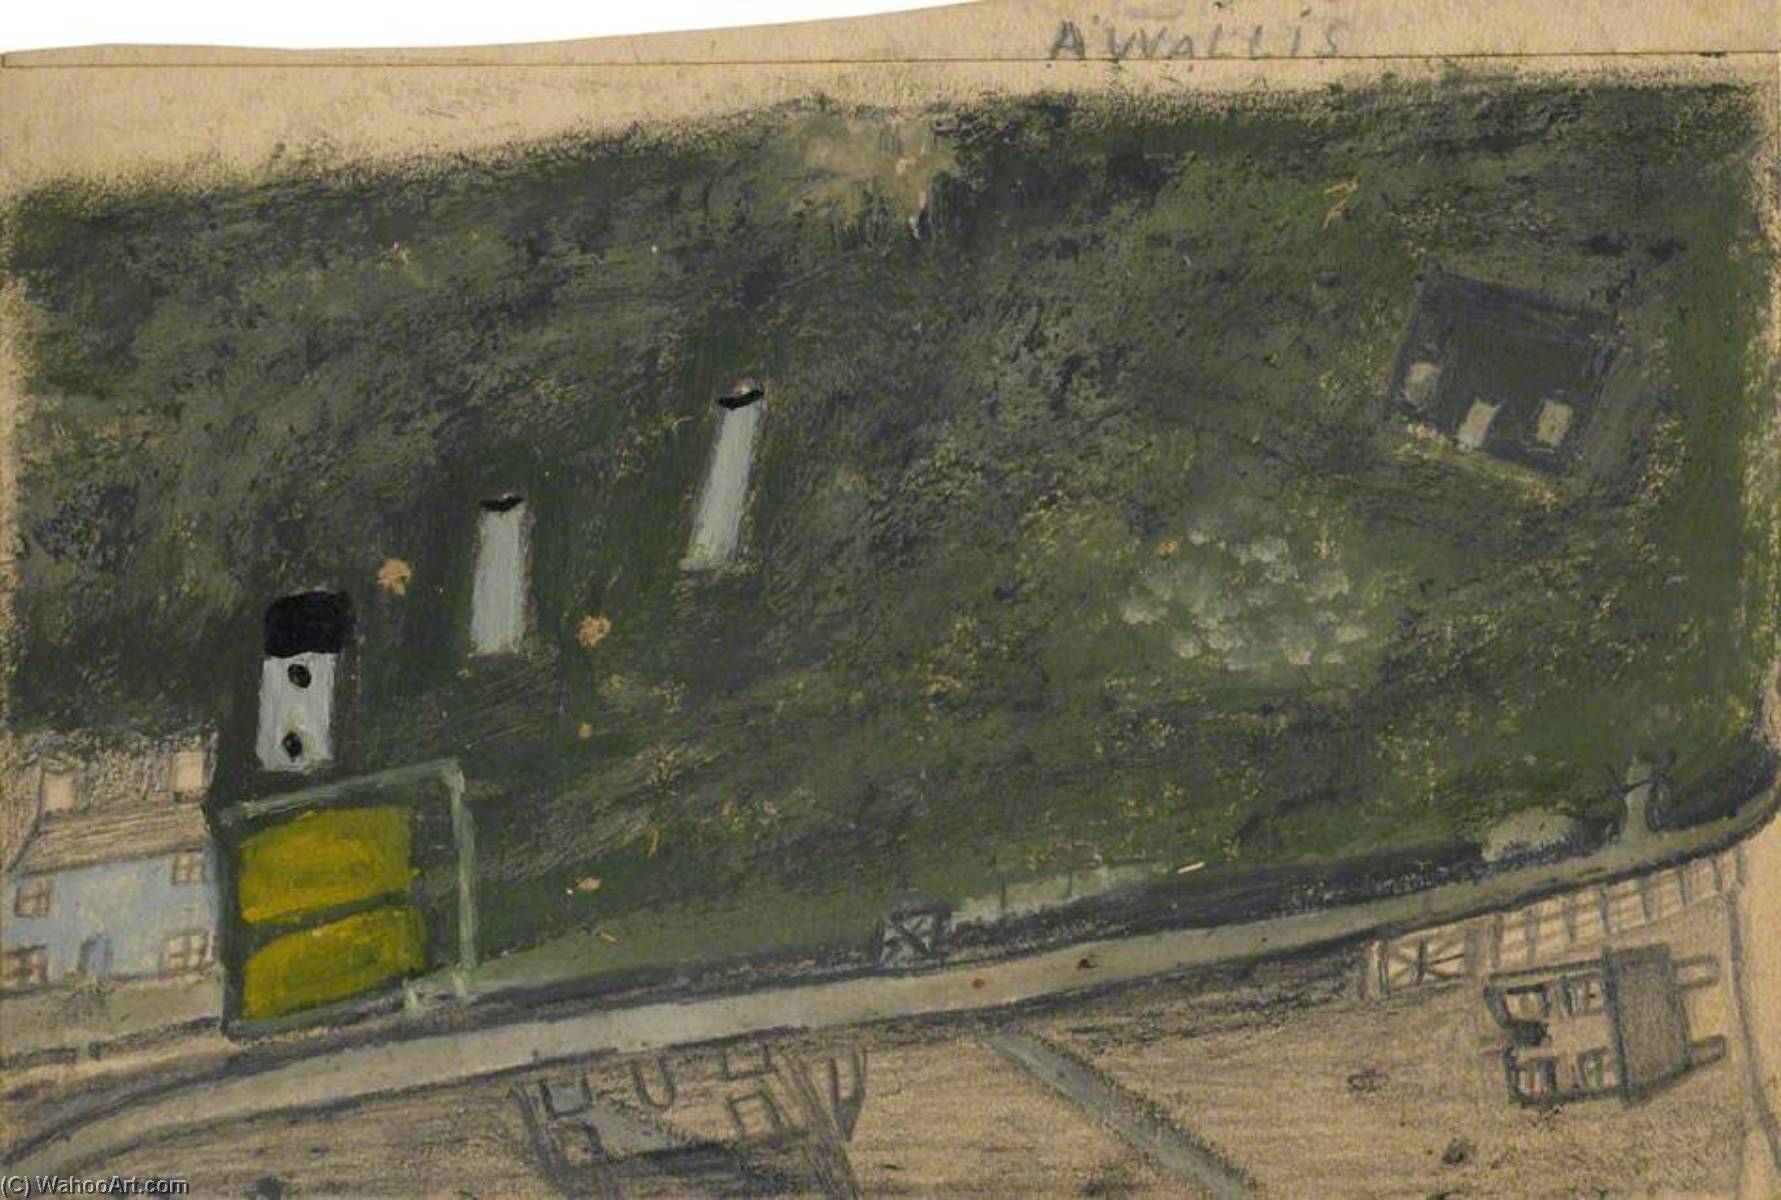 WikiOO.org - Encyclopedia of Fine Arts - Malba, Artwork Alfred Wallis - Landscape with Field, Chimneys and Road between Blue and Dark Green Cottages (Consols Mine)